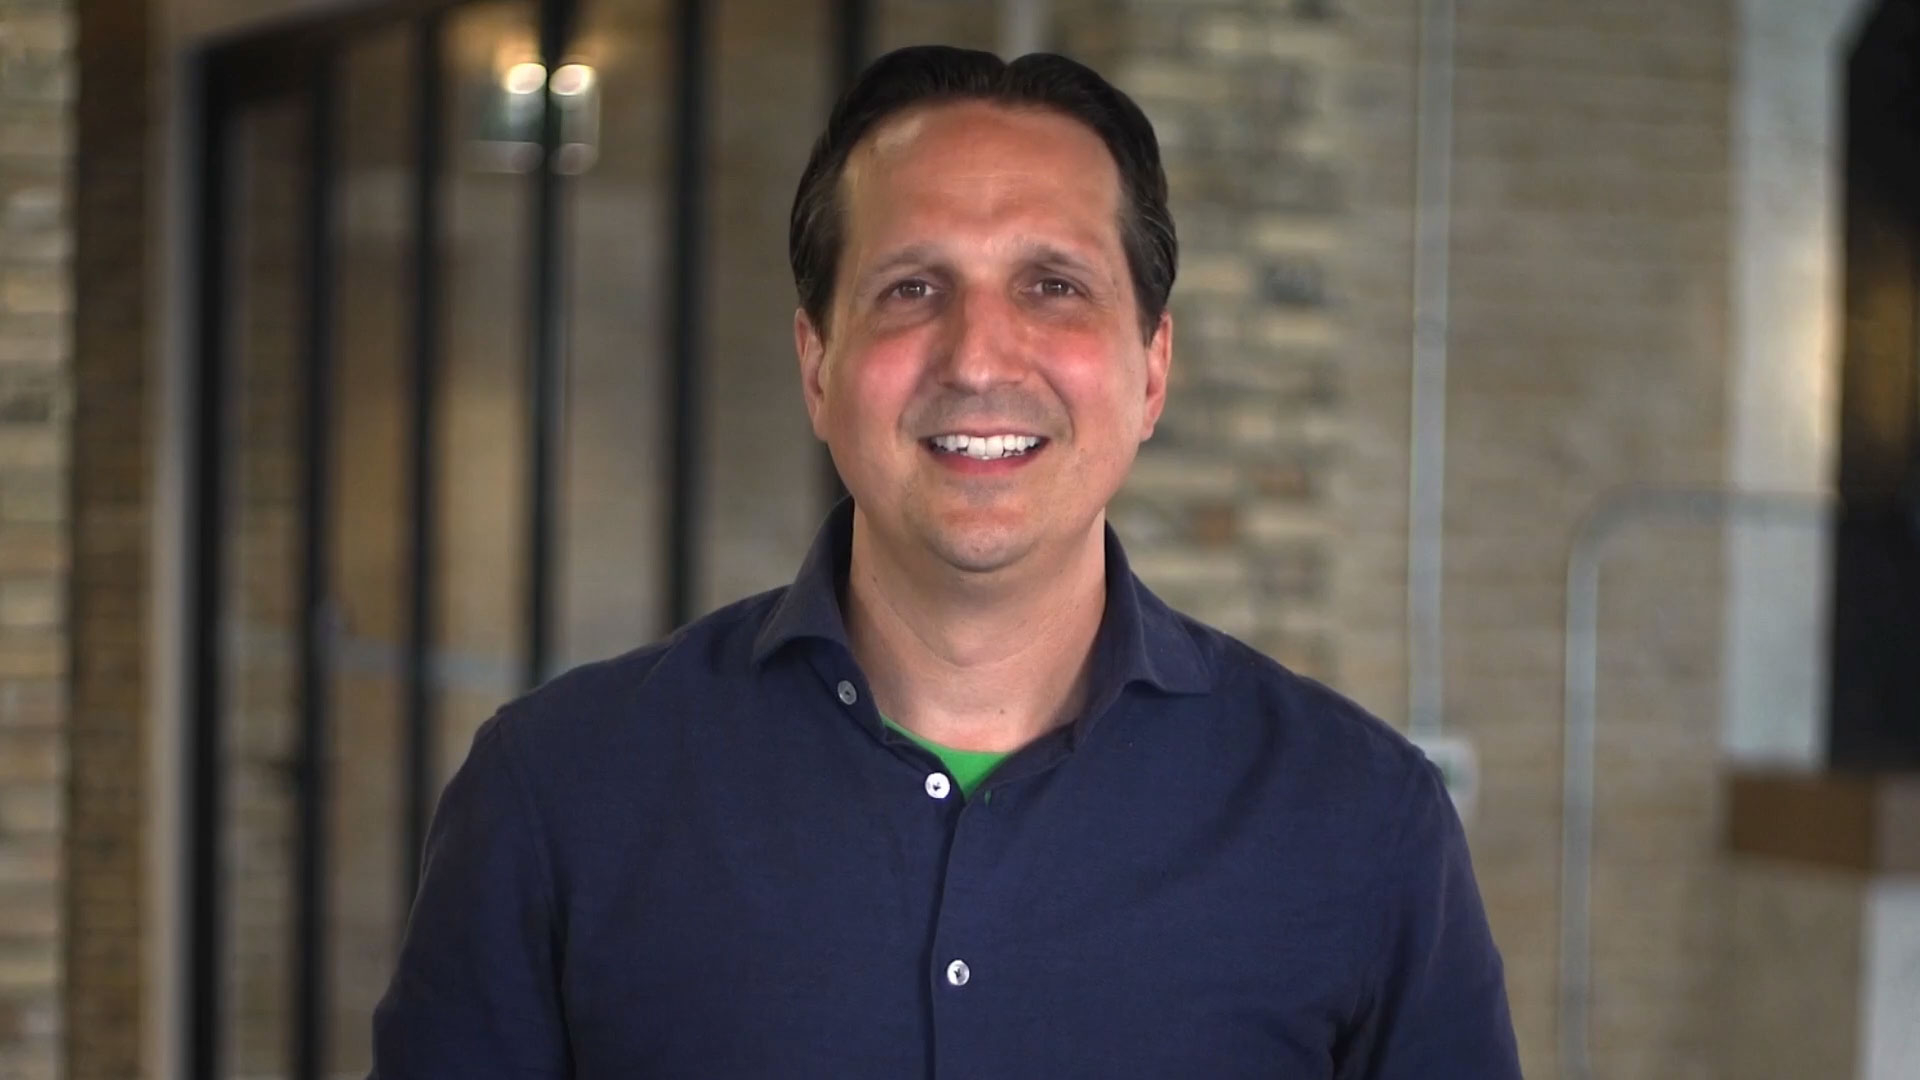 Vidyard launches AI-powered video messaging to transform sales engagement.